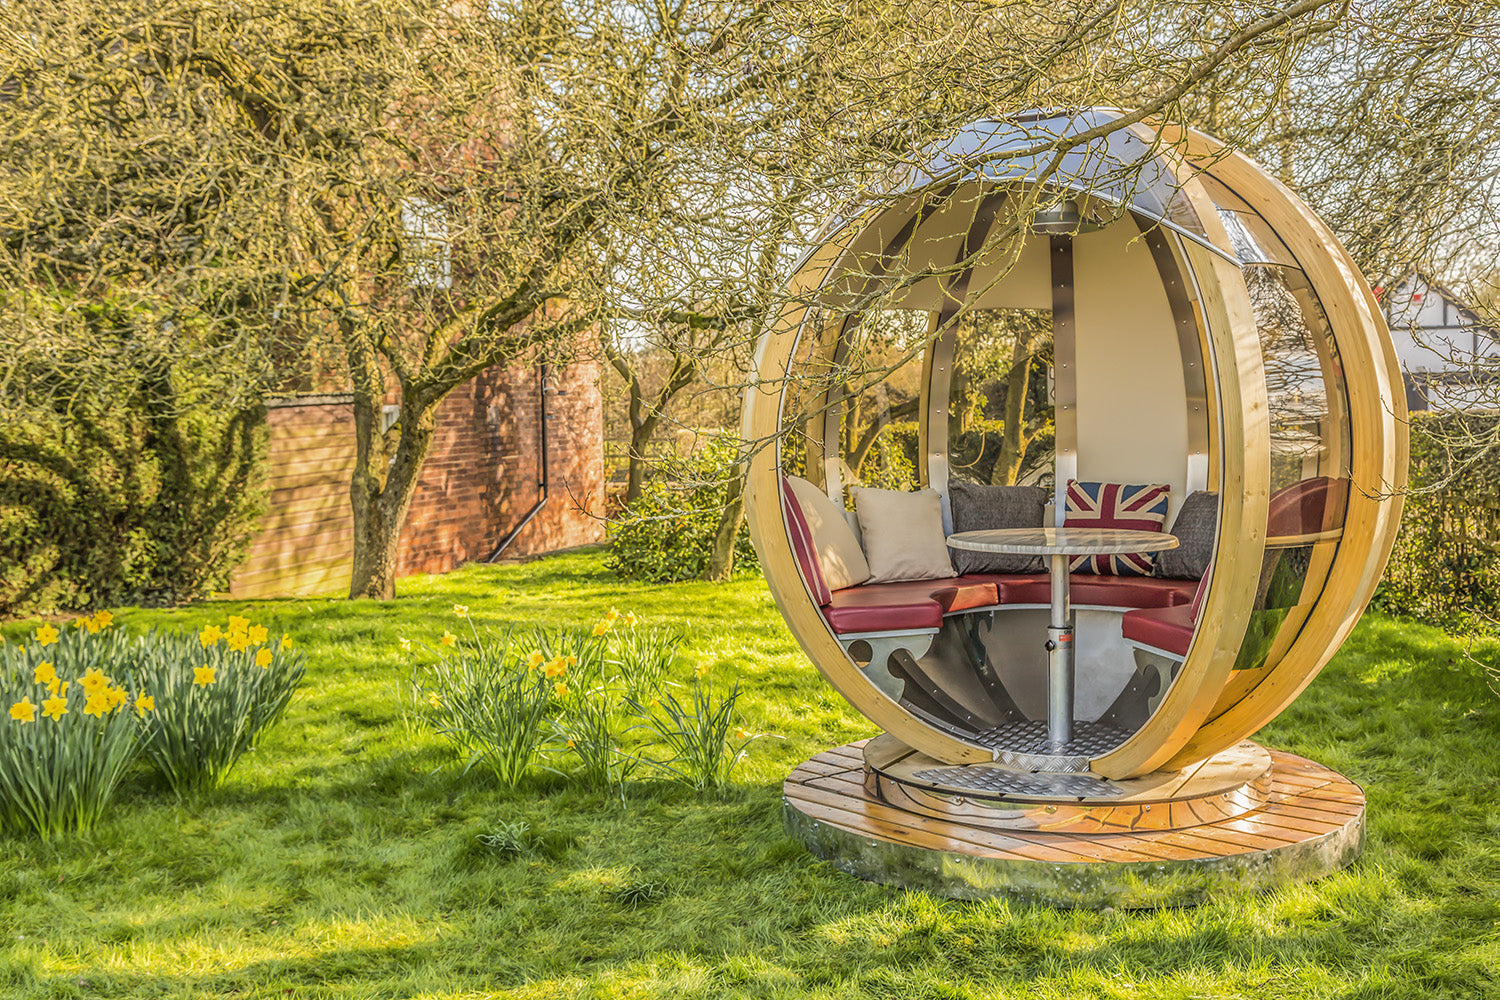 The Rotating Lounger Garden Pod - Vookoo Lifestyle